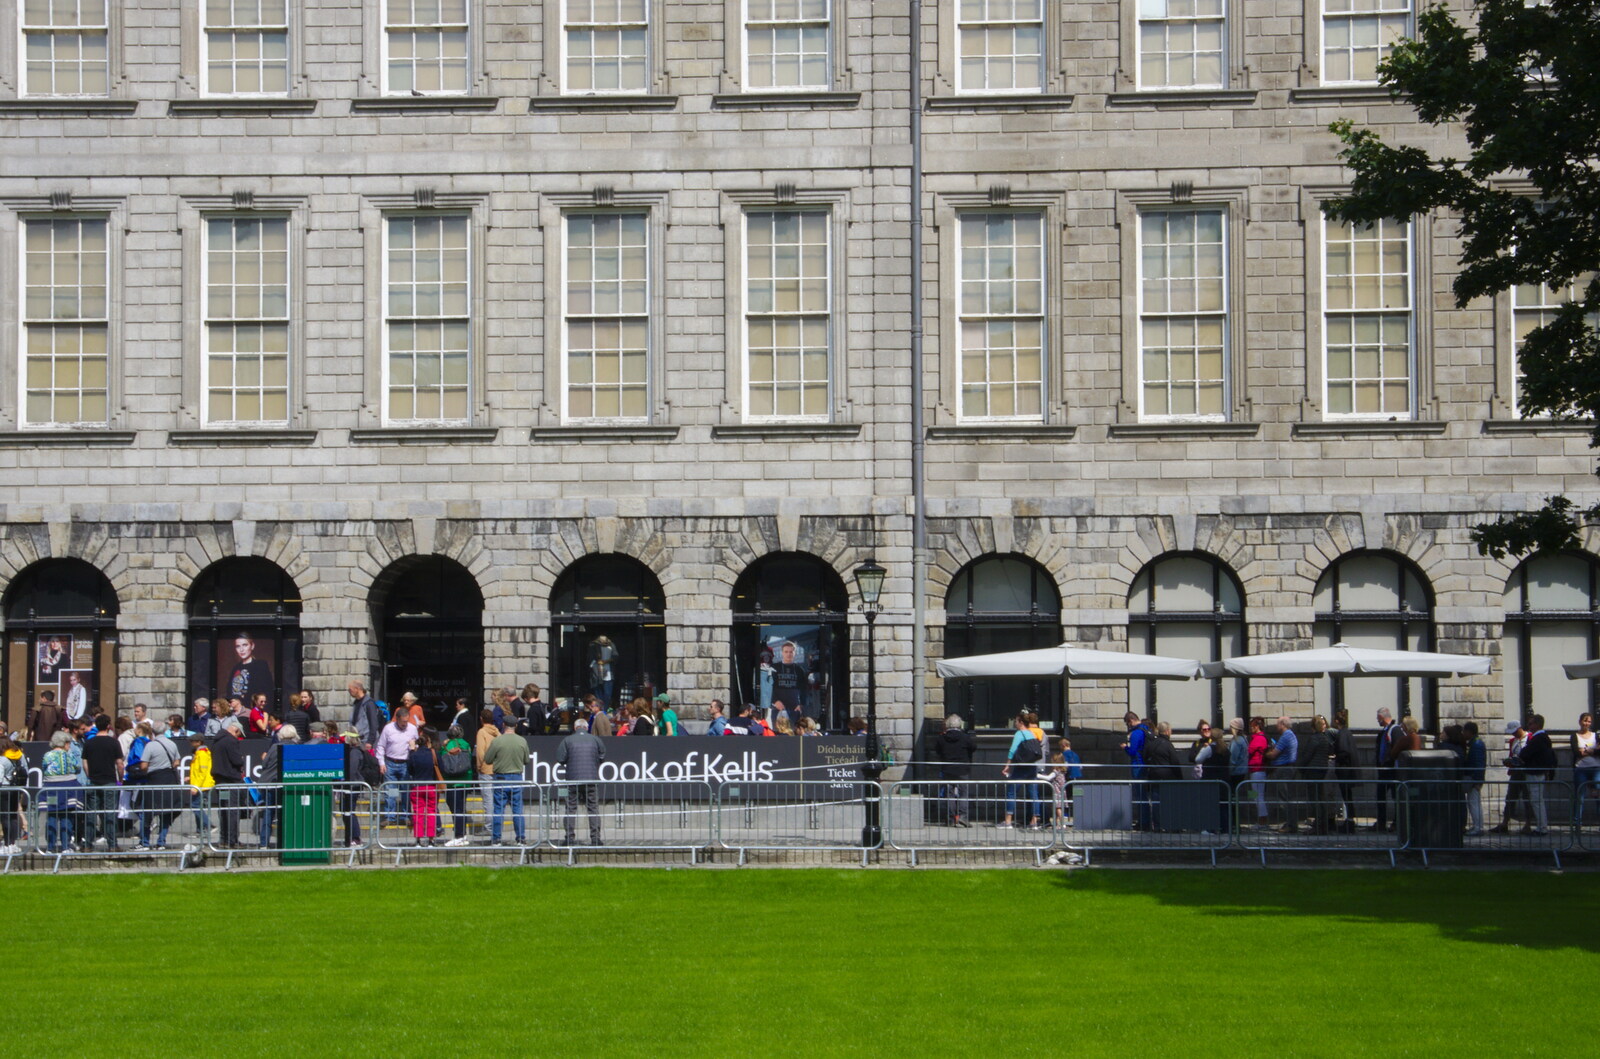 Part of the queue for the Book of Kells from Busking in Temple Bar, Dublin, Ireland - 12th August 2019